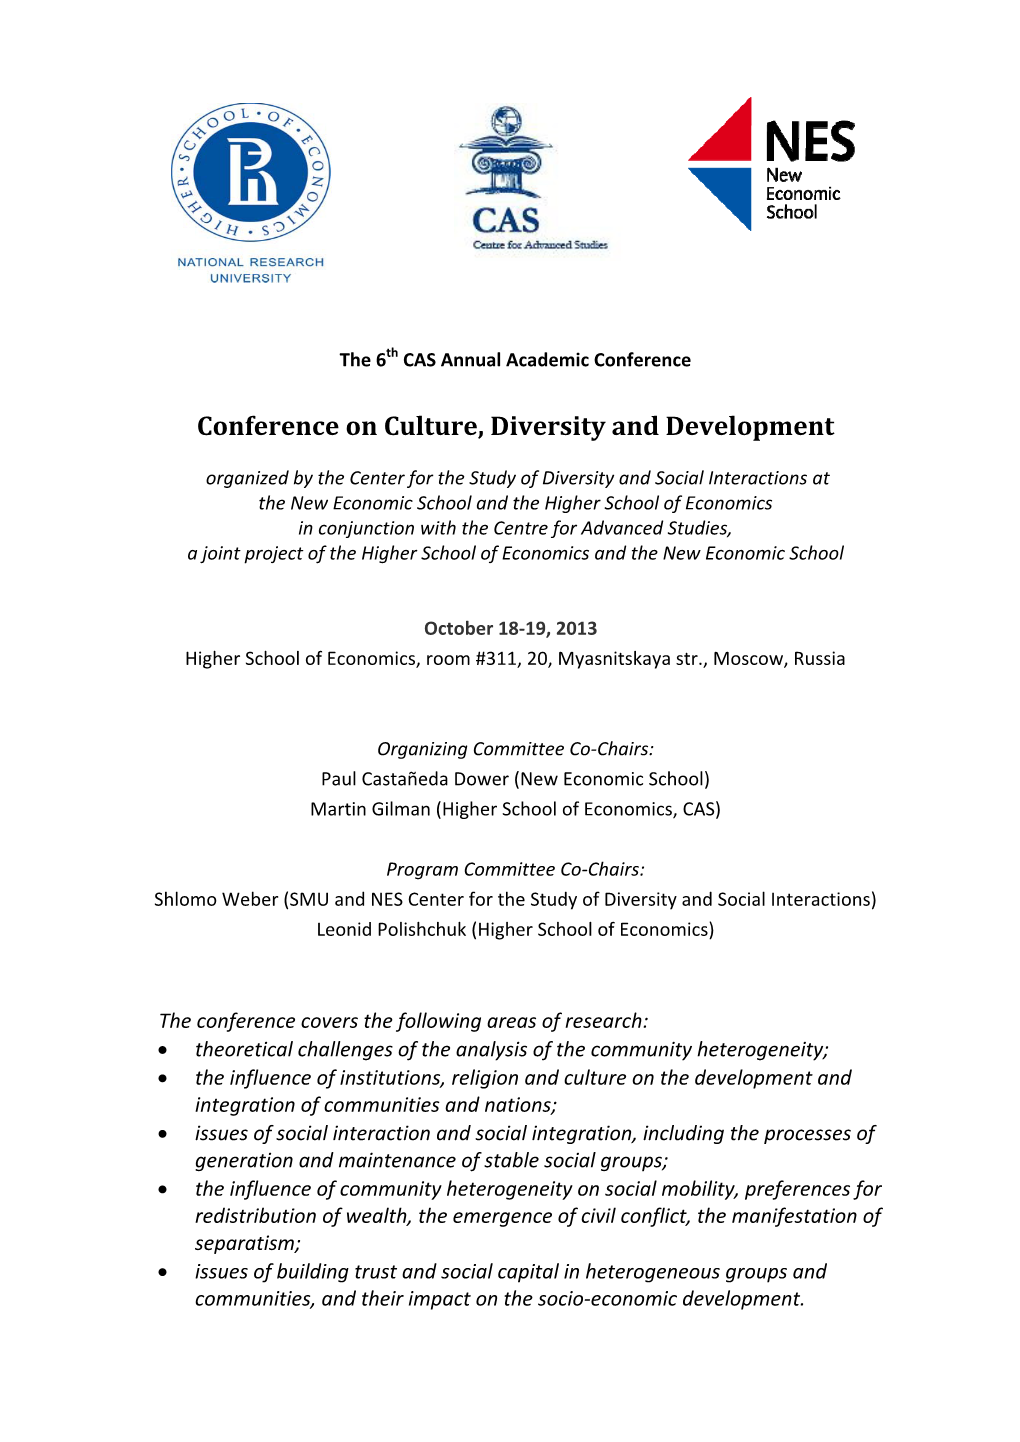 Conference on Culture, Diversity and Development